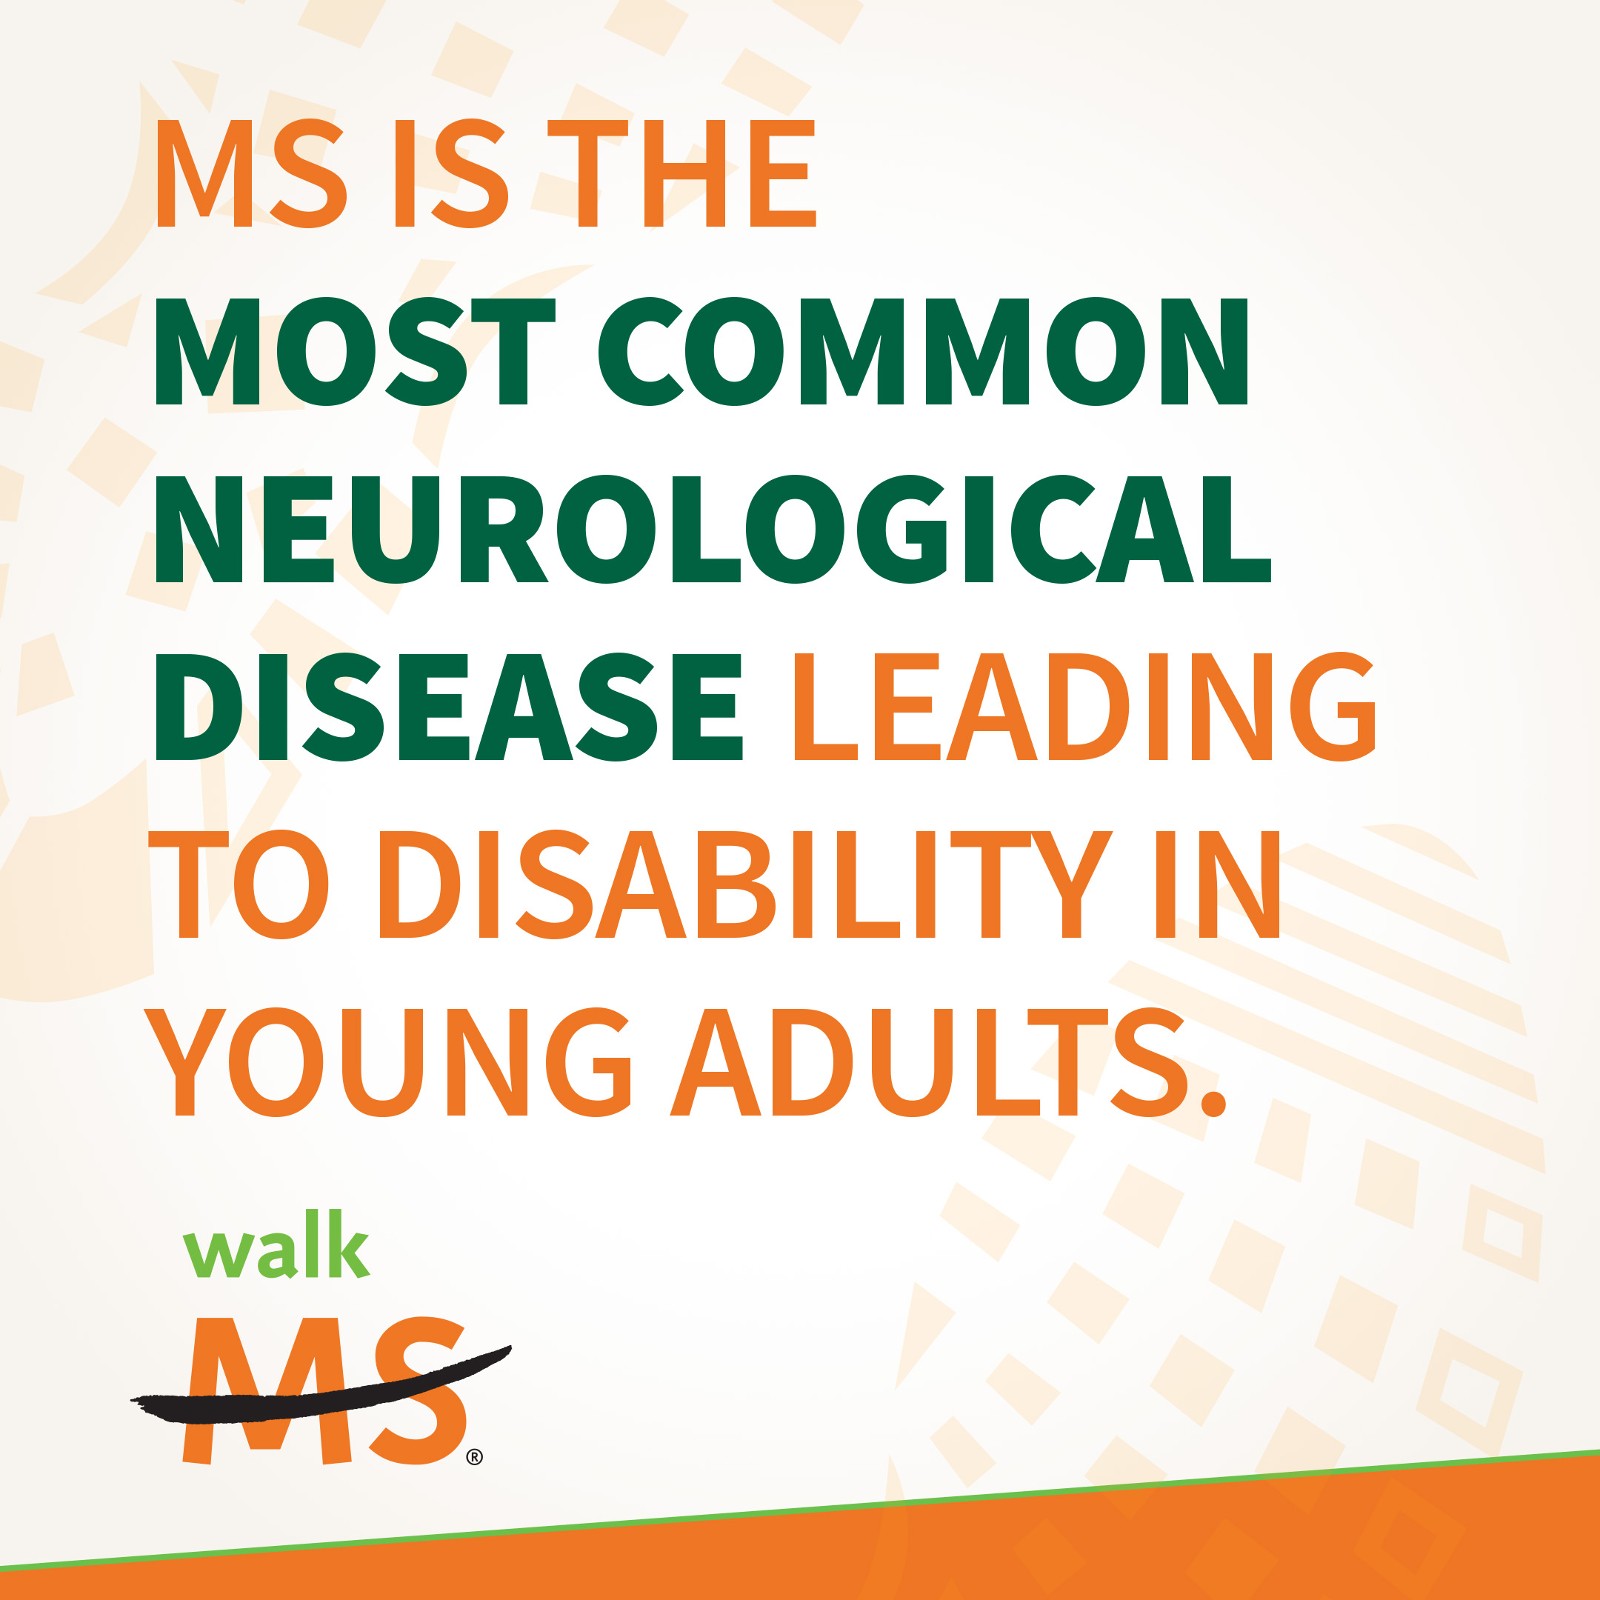 MS is the most common neurological disease leading to disability in young adults.